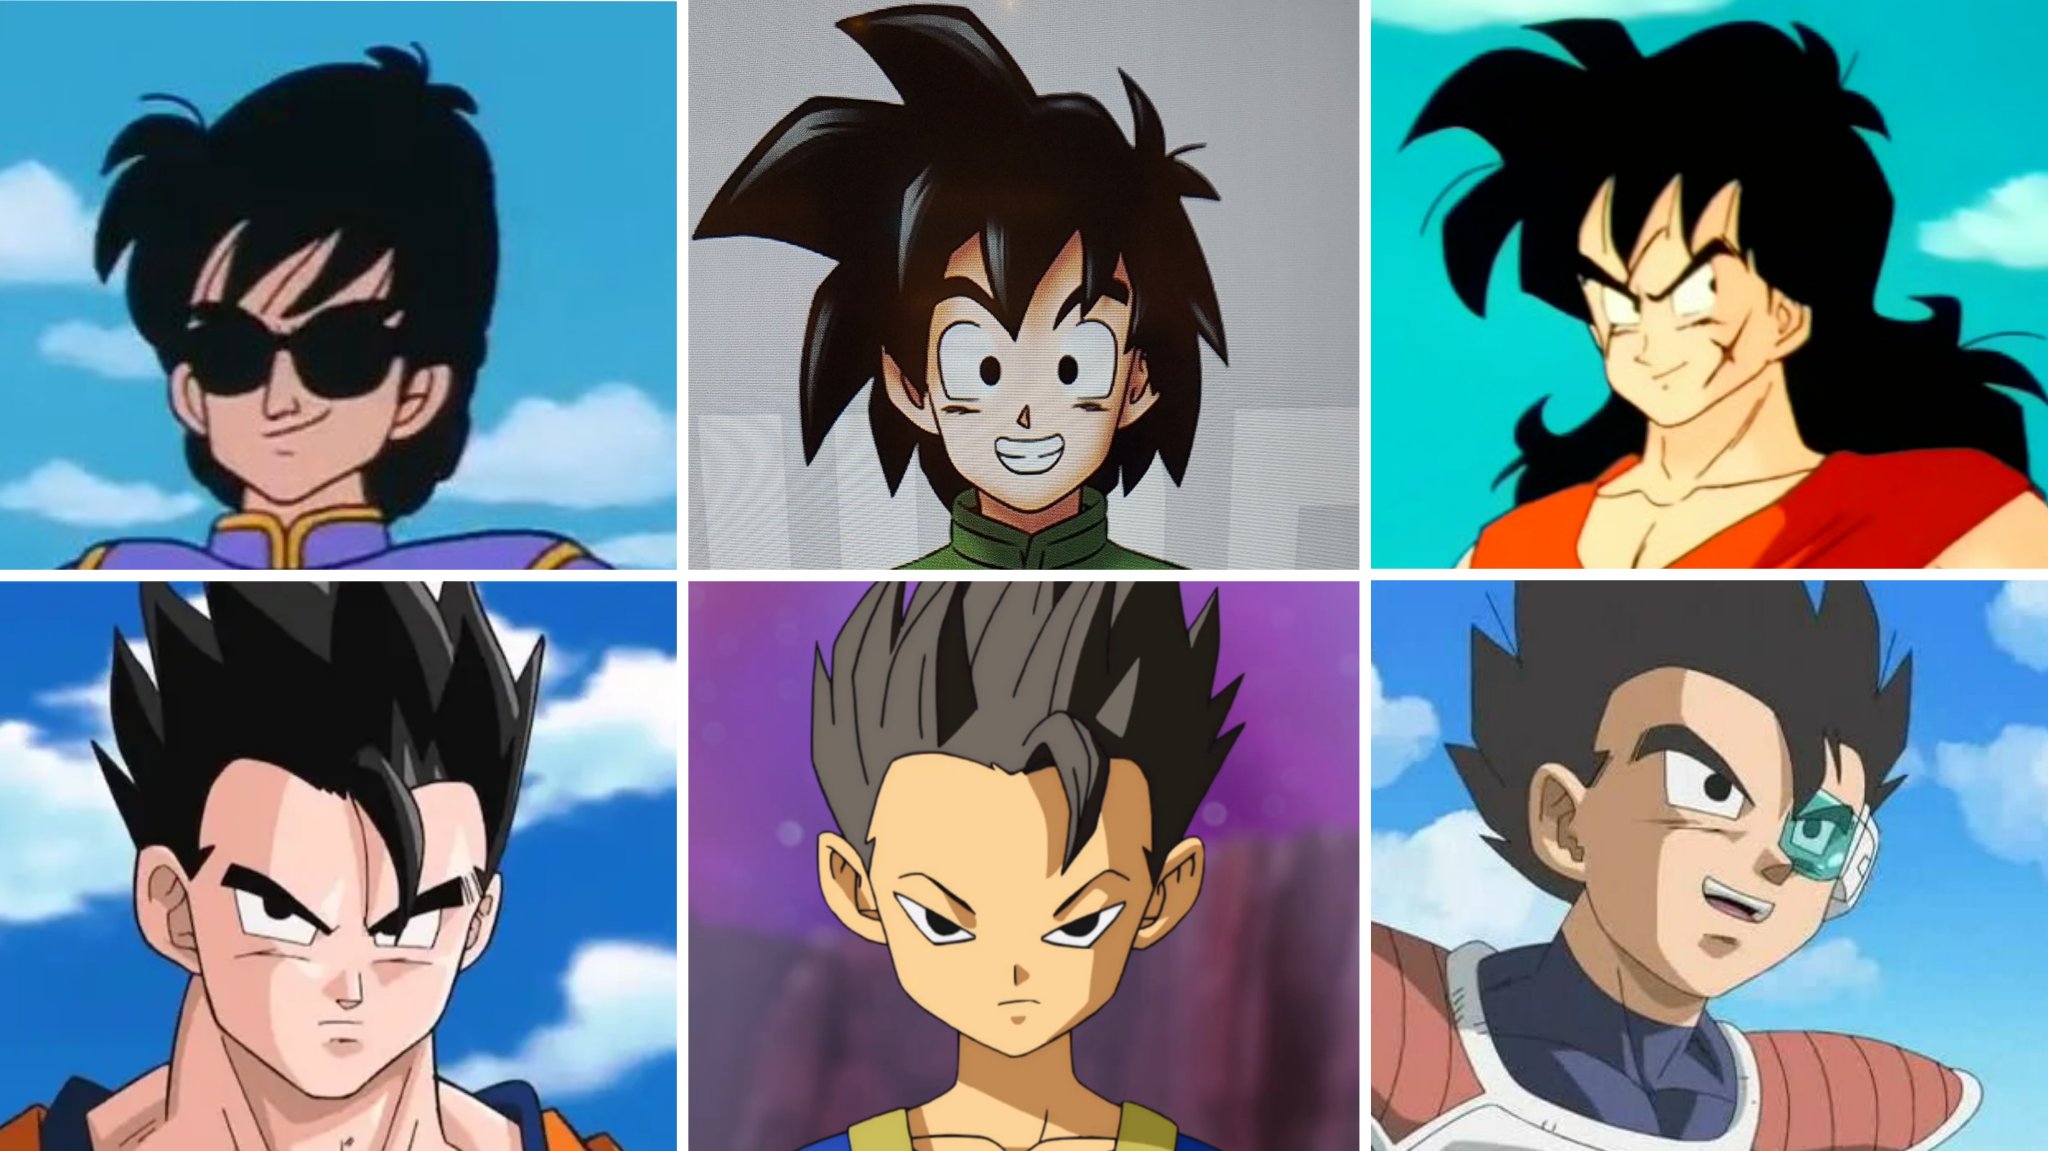 Opinion: Teen Goten should have gotten Beat hairstyle. It would look much  cooler while having a difference from Goku too. : r/Dragonballsuper